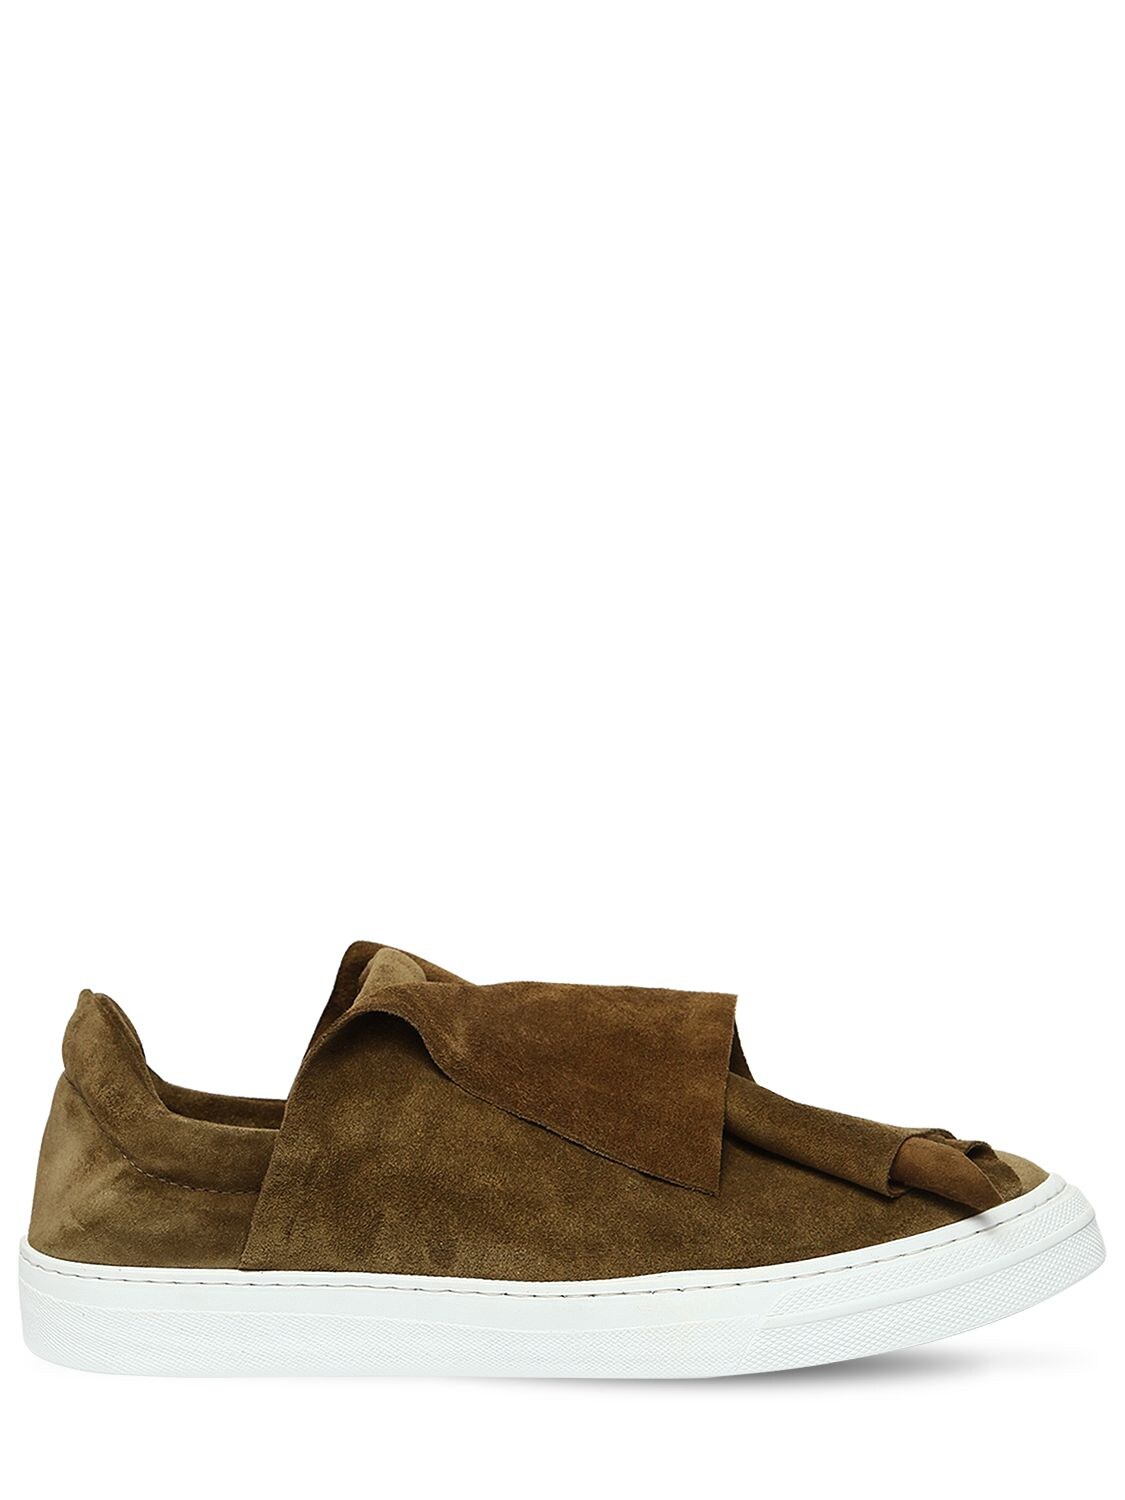 Ports 1961 20mm Layered Suede Slip-on Sneakers In Khaki